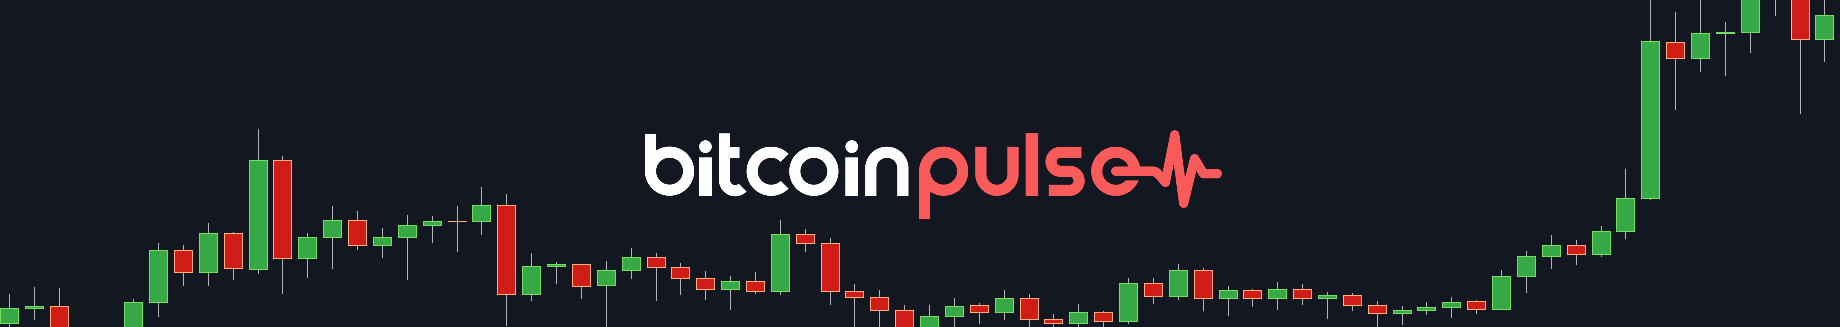 More 2020 Parallels and Price Analysis - Bitcoin Pulse #118